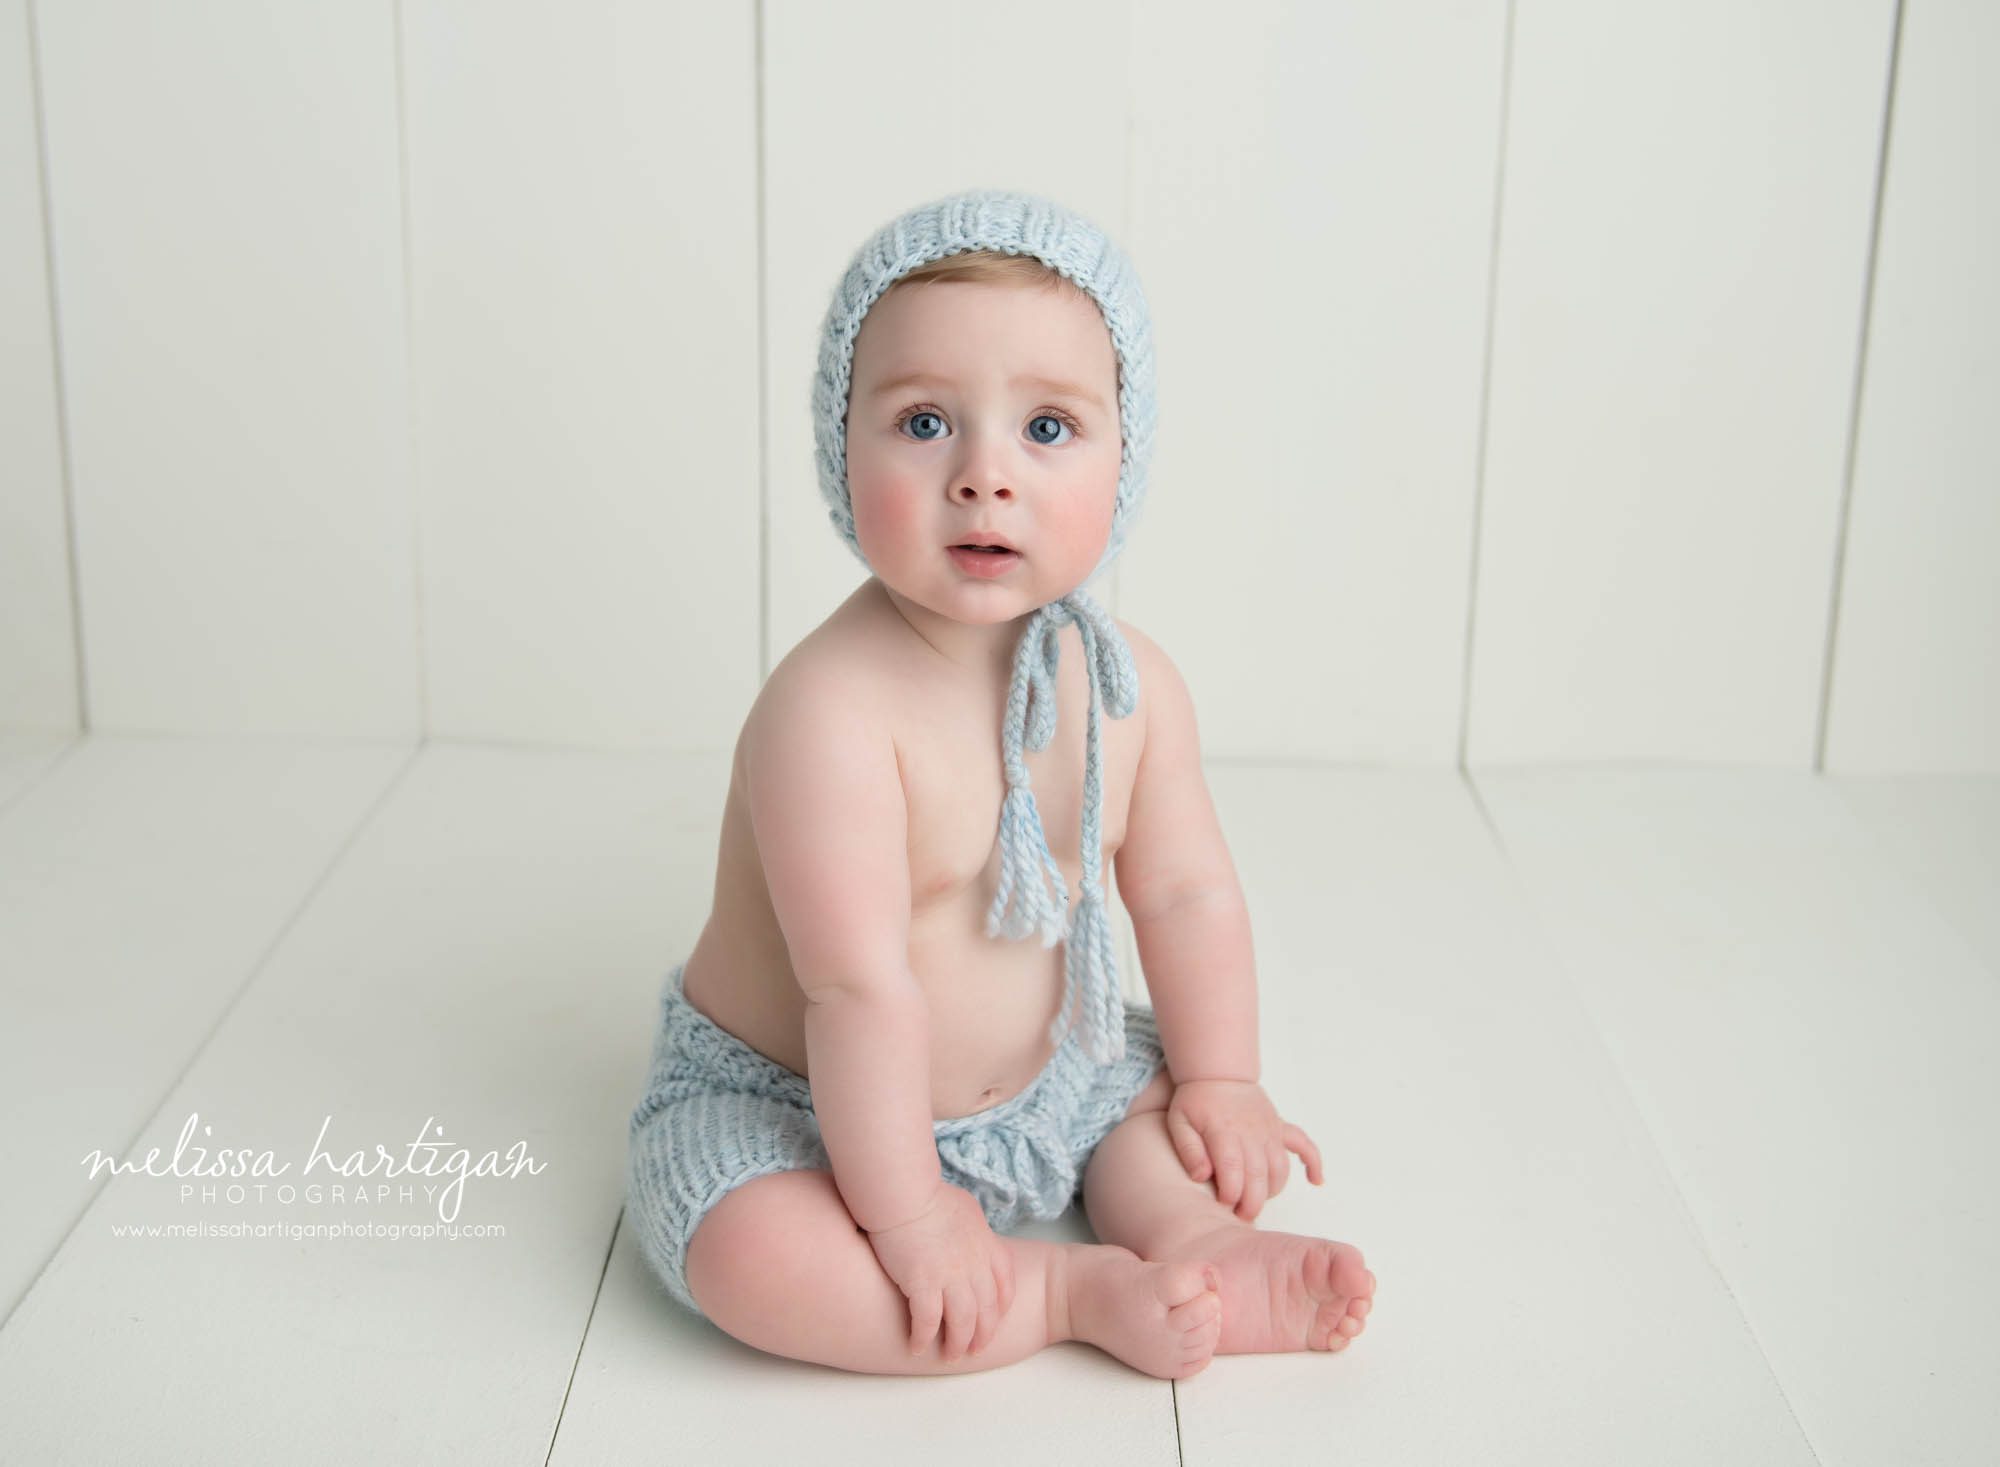 baby boy sitting on wooden boards in photography studio wearing light blue knitted bonnet